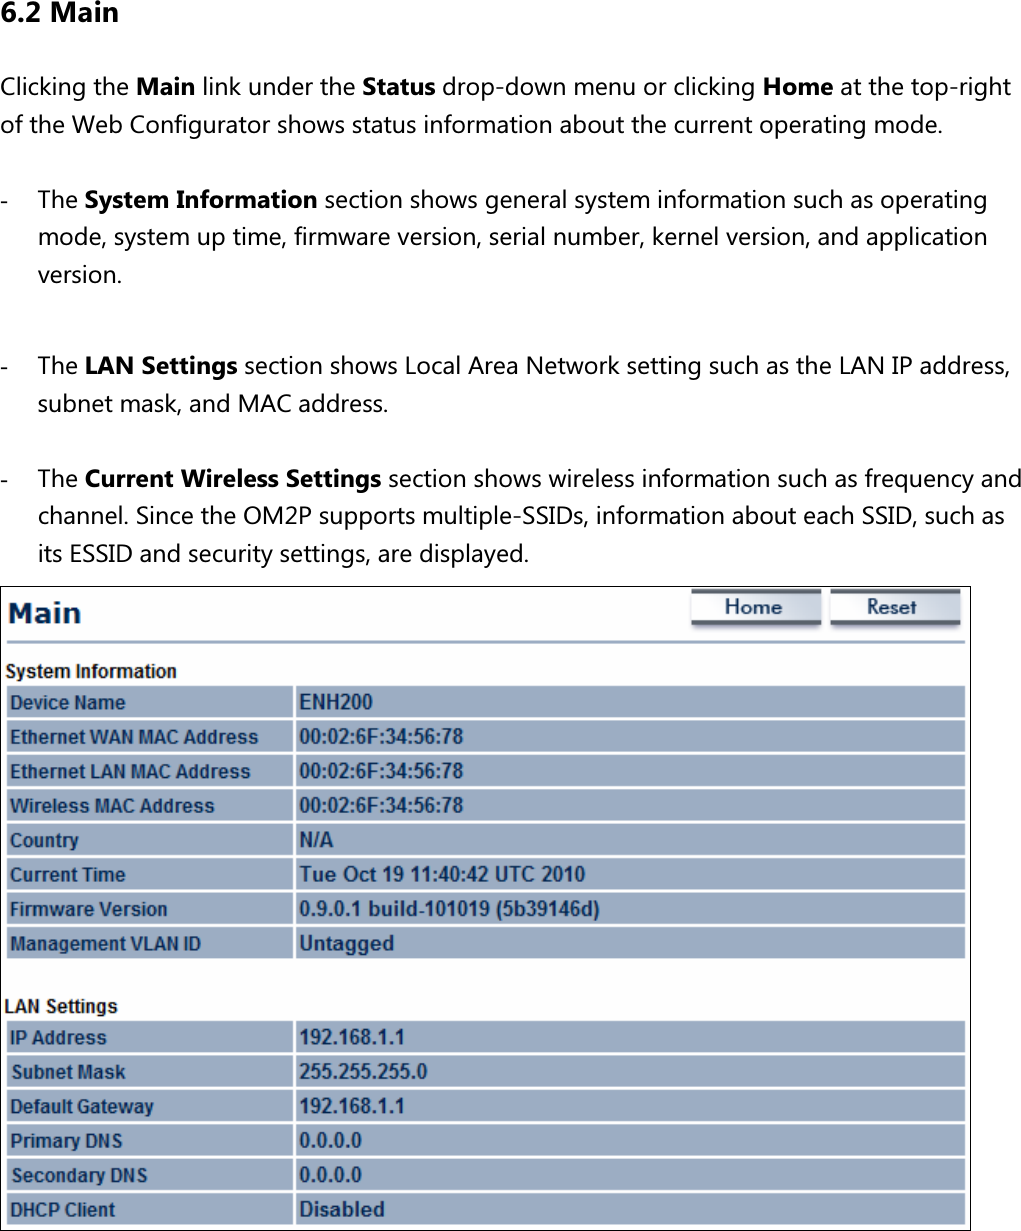 6.2 Main Clicking the Main link under the Status drop-down menu or clicking Home at the top-right of the Web Configurator shows status information about the current operating mode.    - The System Information section shows general system information such as operating mode, system up time, firmware version, serial number, kernel version, and application version.  - The LAN Settings section shows Local Area Network setting such as the LAN IP address, subnet mask, and MAC address.    - The Current Wireless Settings section shows wireless information such as frequency and channel. Since the OM2P supports multiple-SSIDs, information about each SSID, such as its ESSID and security settings, are displayed. 